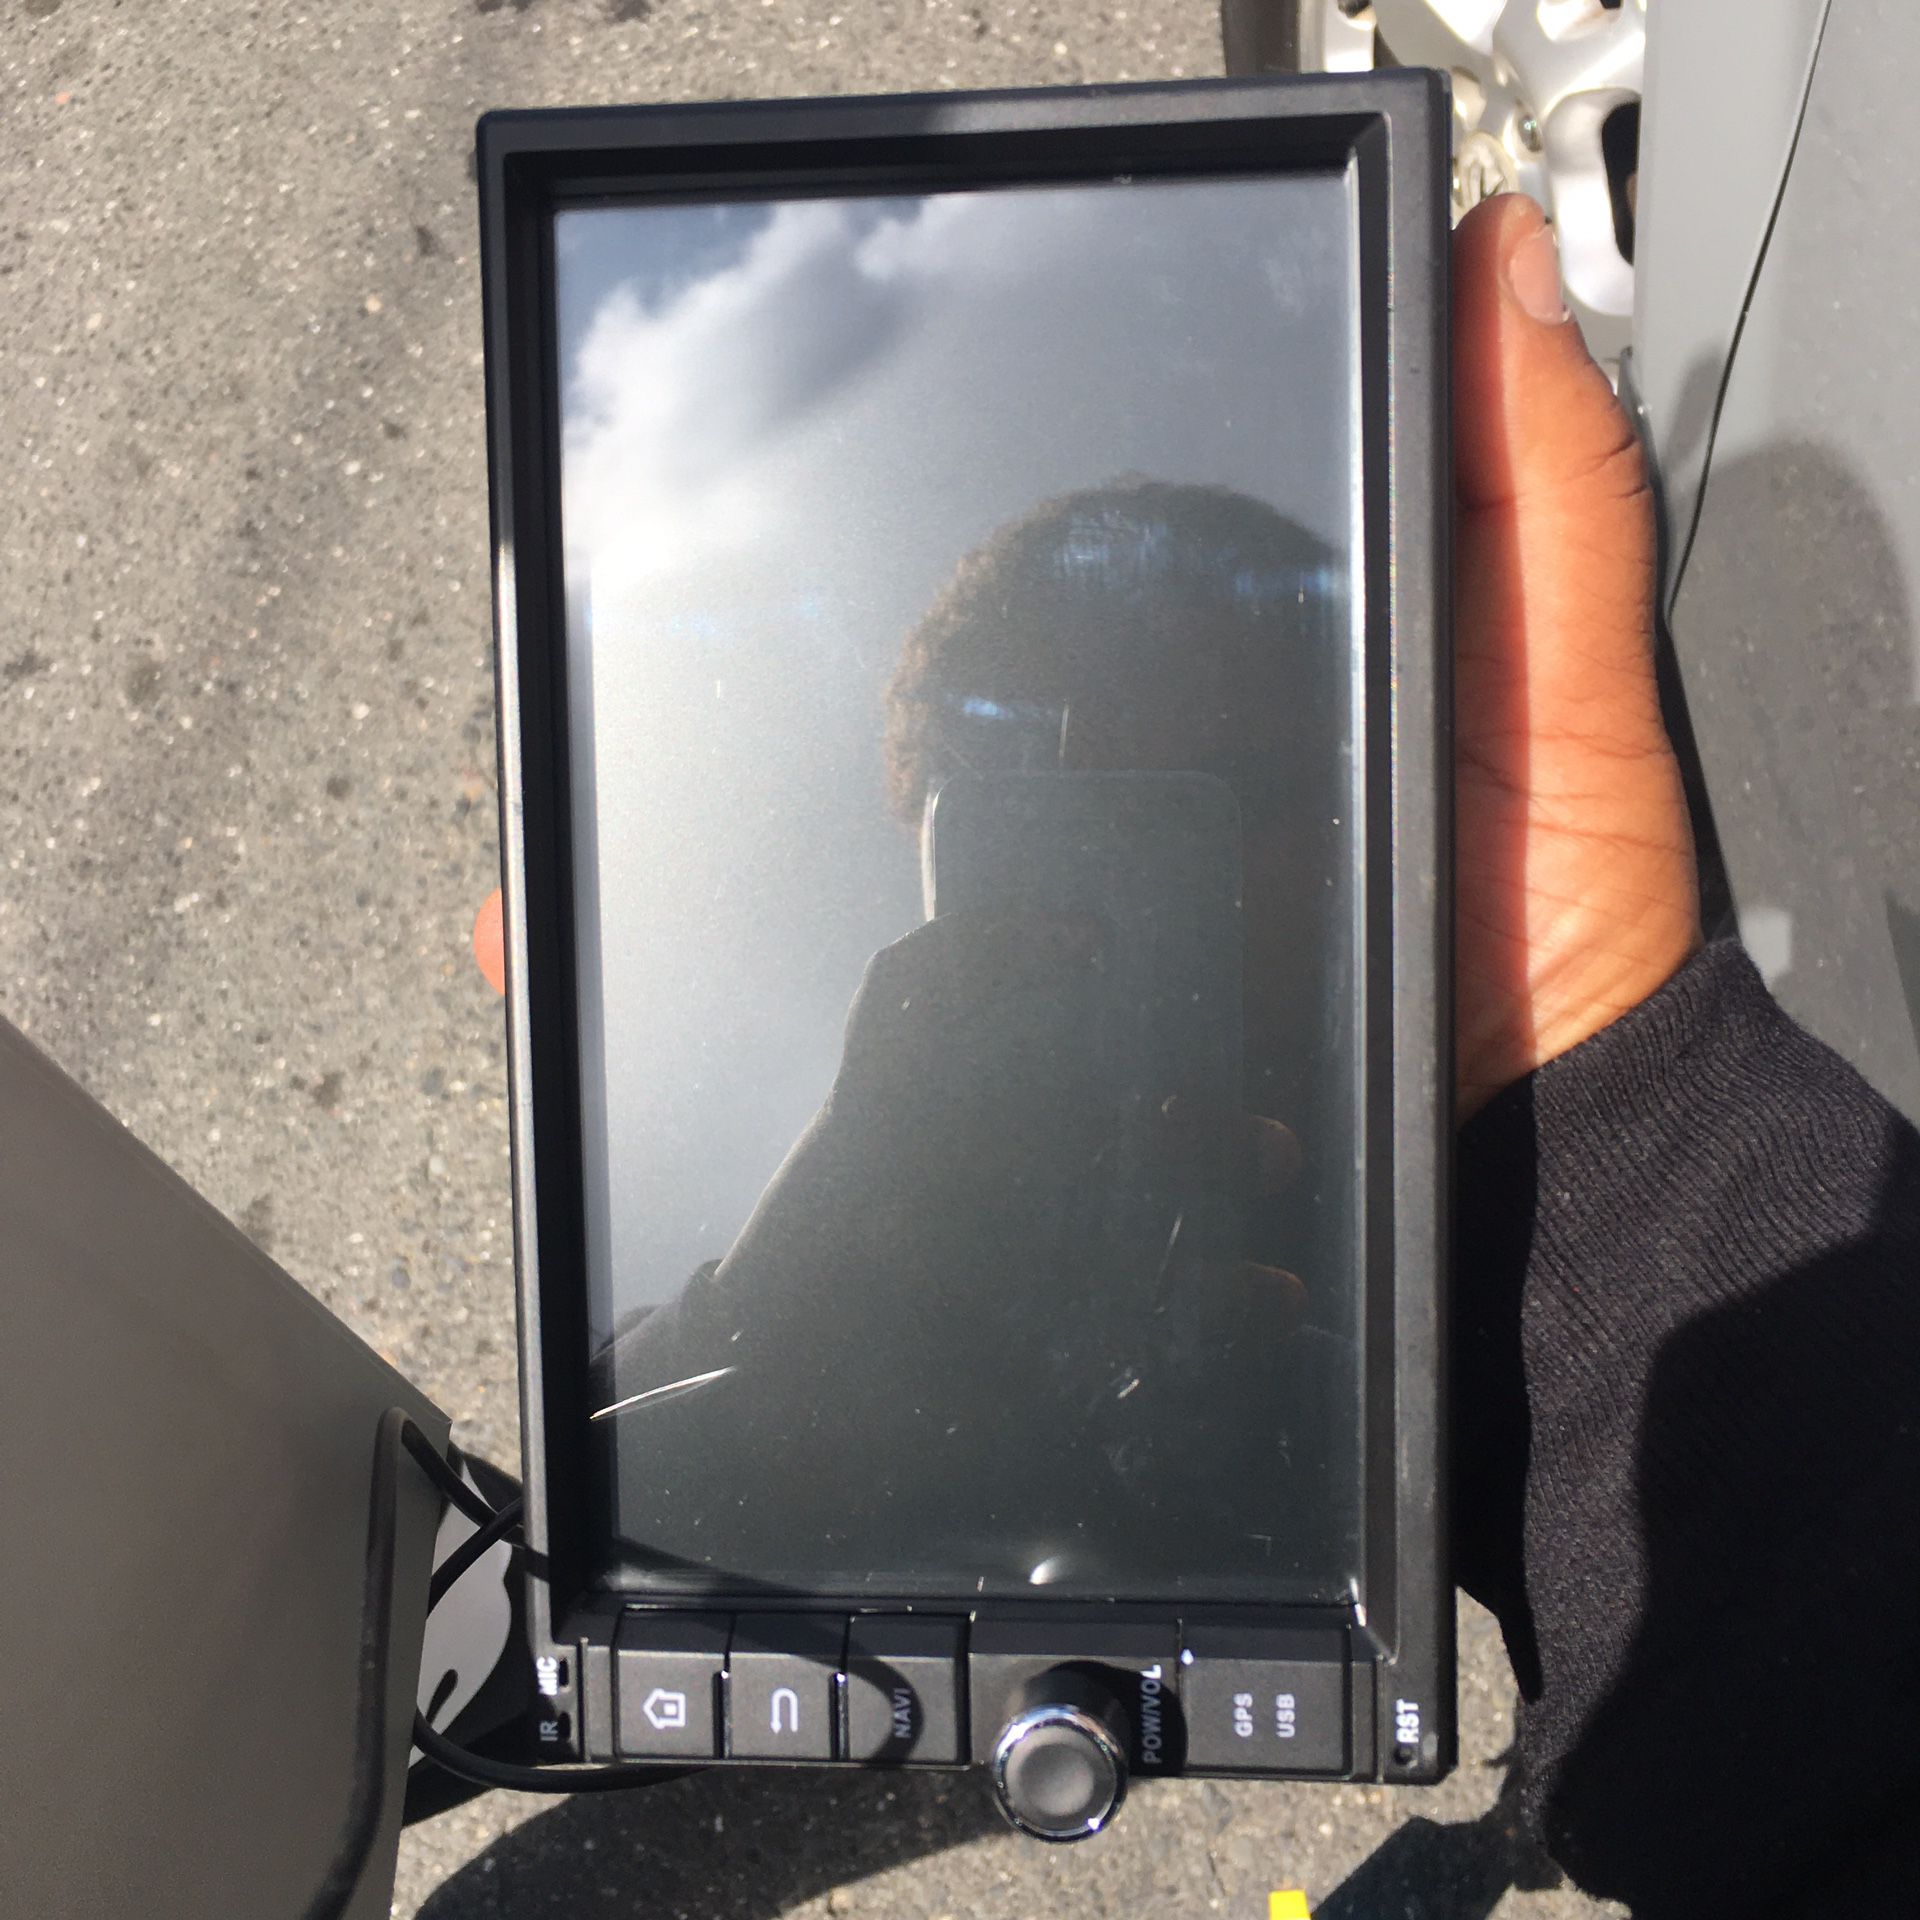 Radio screen with back up camera